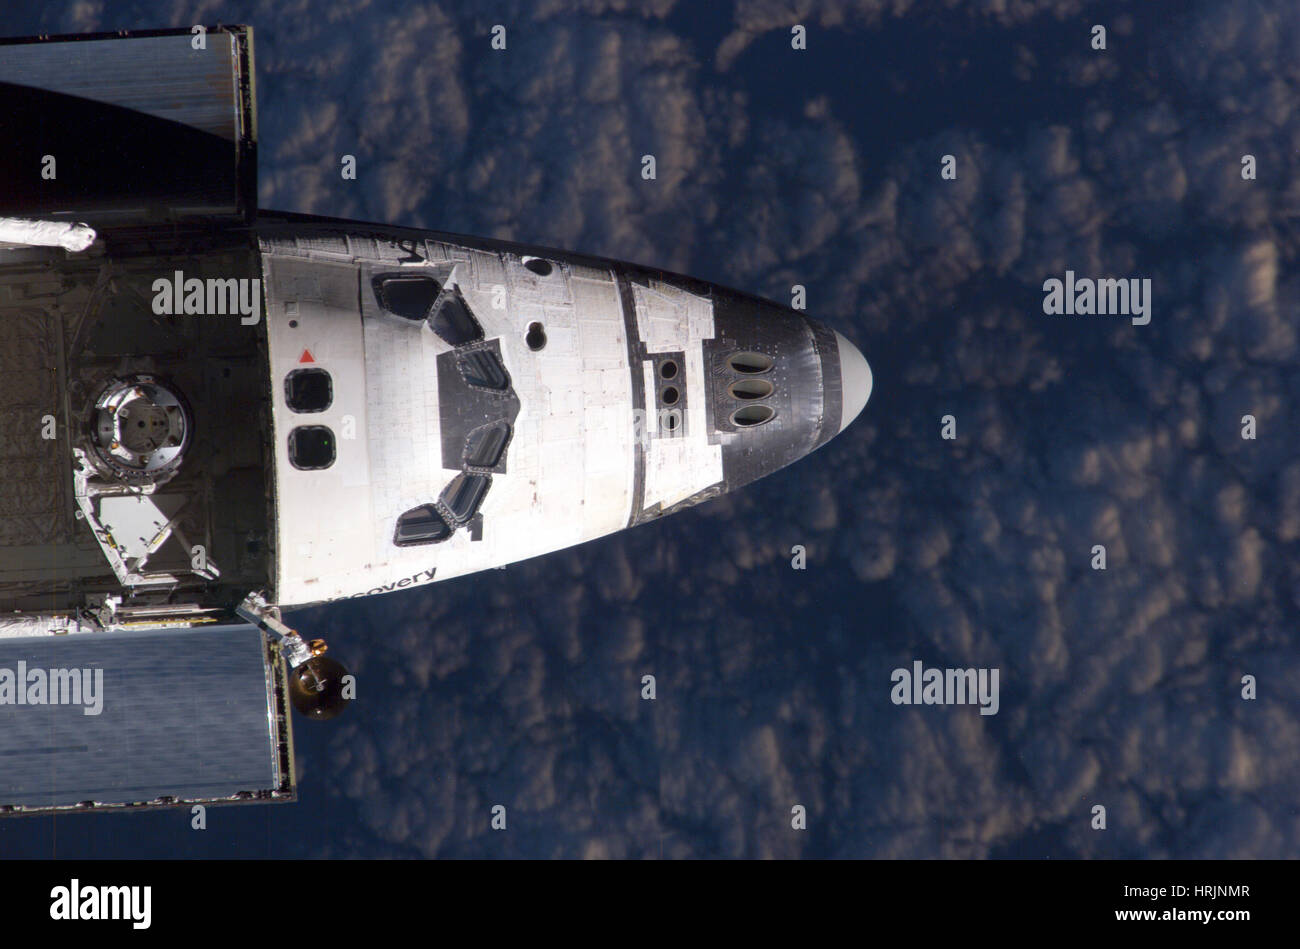 STS-114, Space Shuttle Discovery, ISS Image Stock Photo